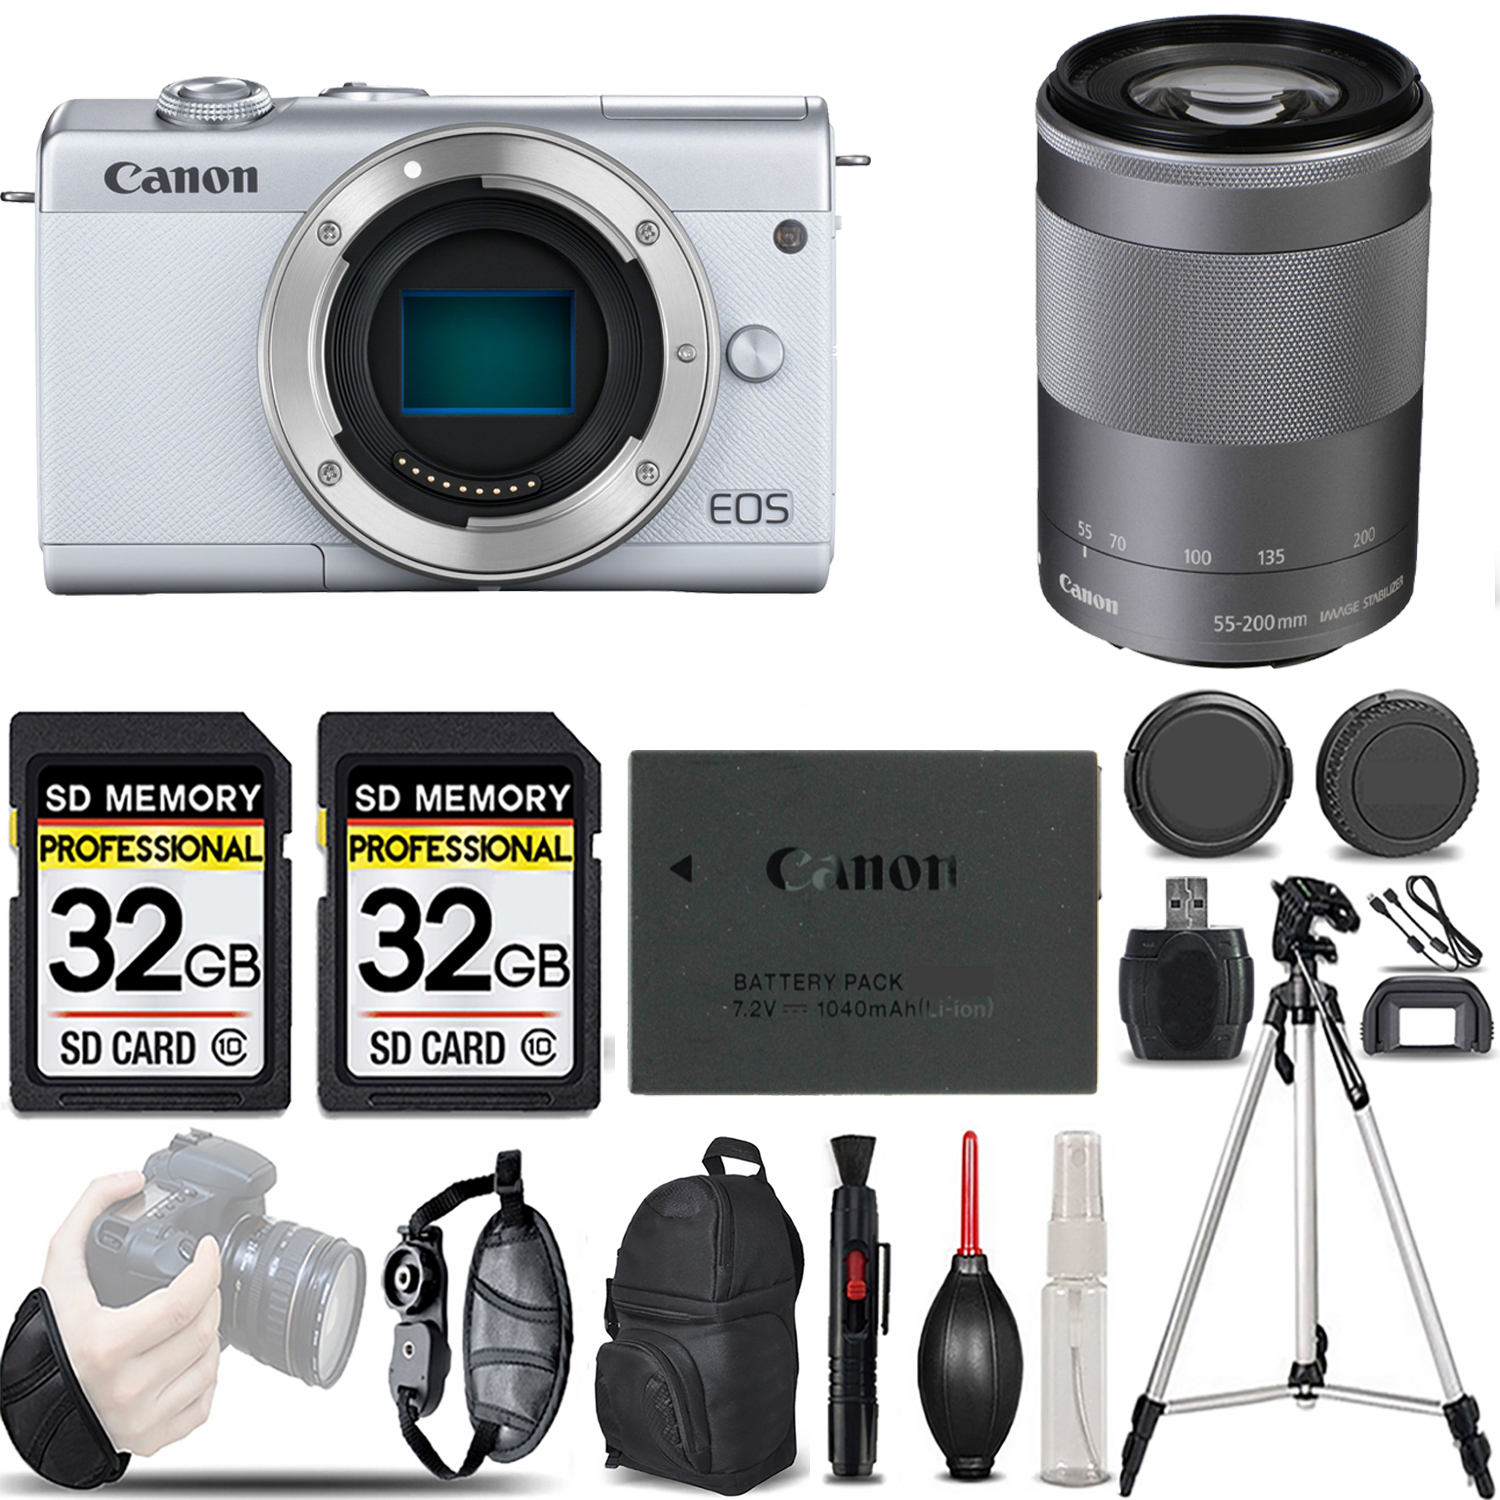 M200 Camera (White) + 55-200mm f/4.5-6.3 IS STM Lens (Silver) - LOADED KIT *FREE SHIPPING*